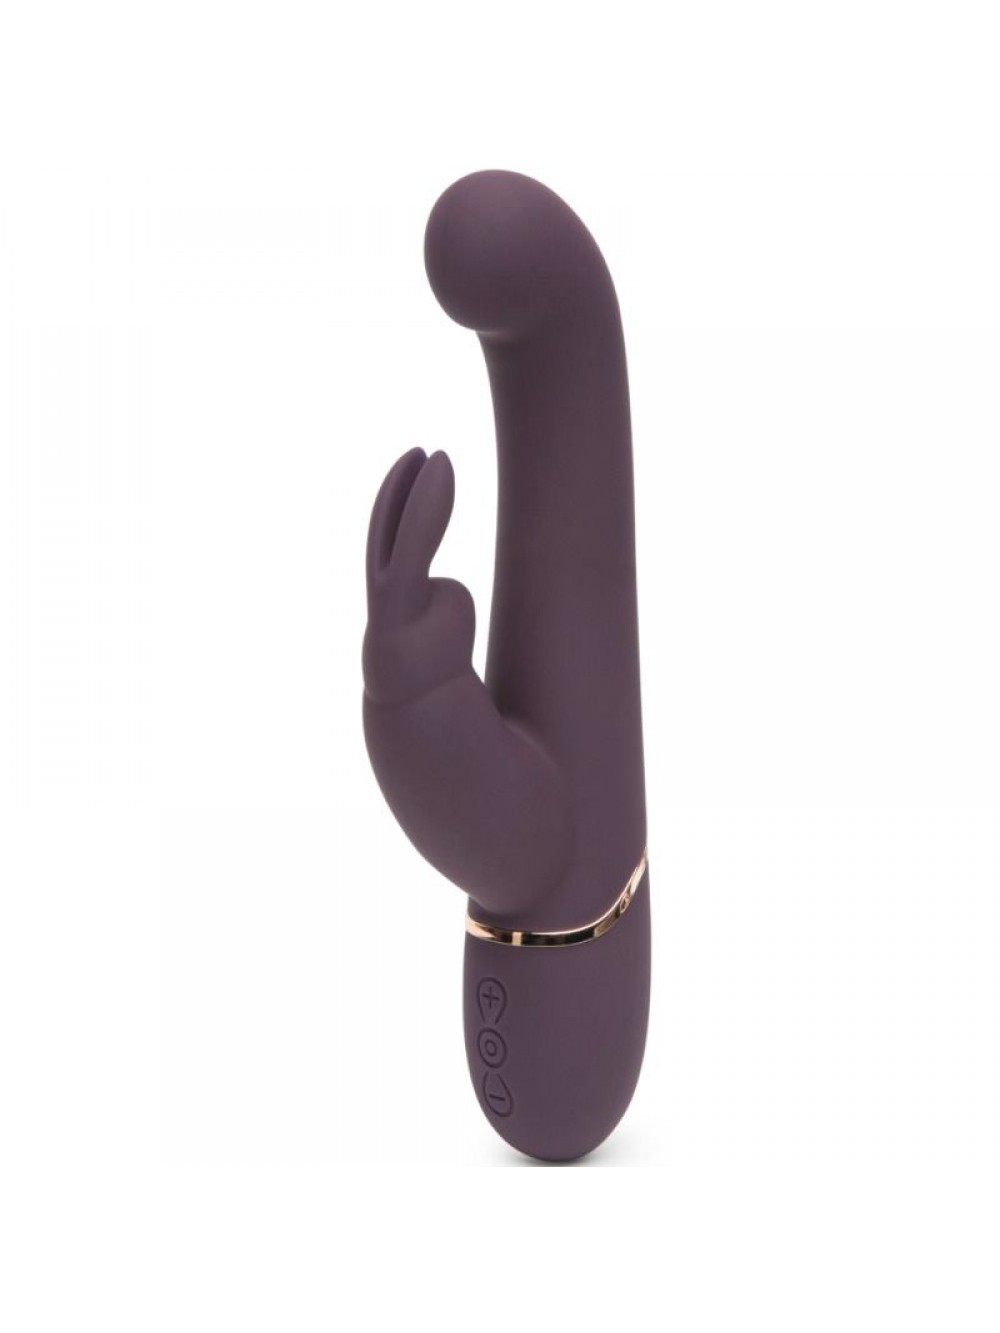 FIFTY SHADES FREED COME TO BED RECHARGEABLE SLIMLINE RABBIT VIBRATOR 5060493003396